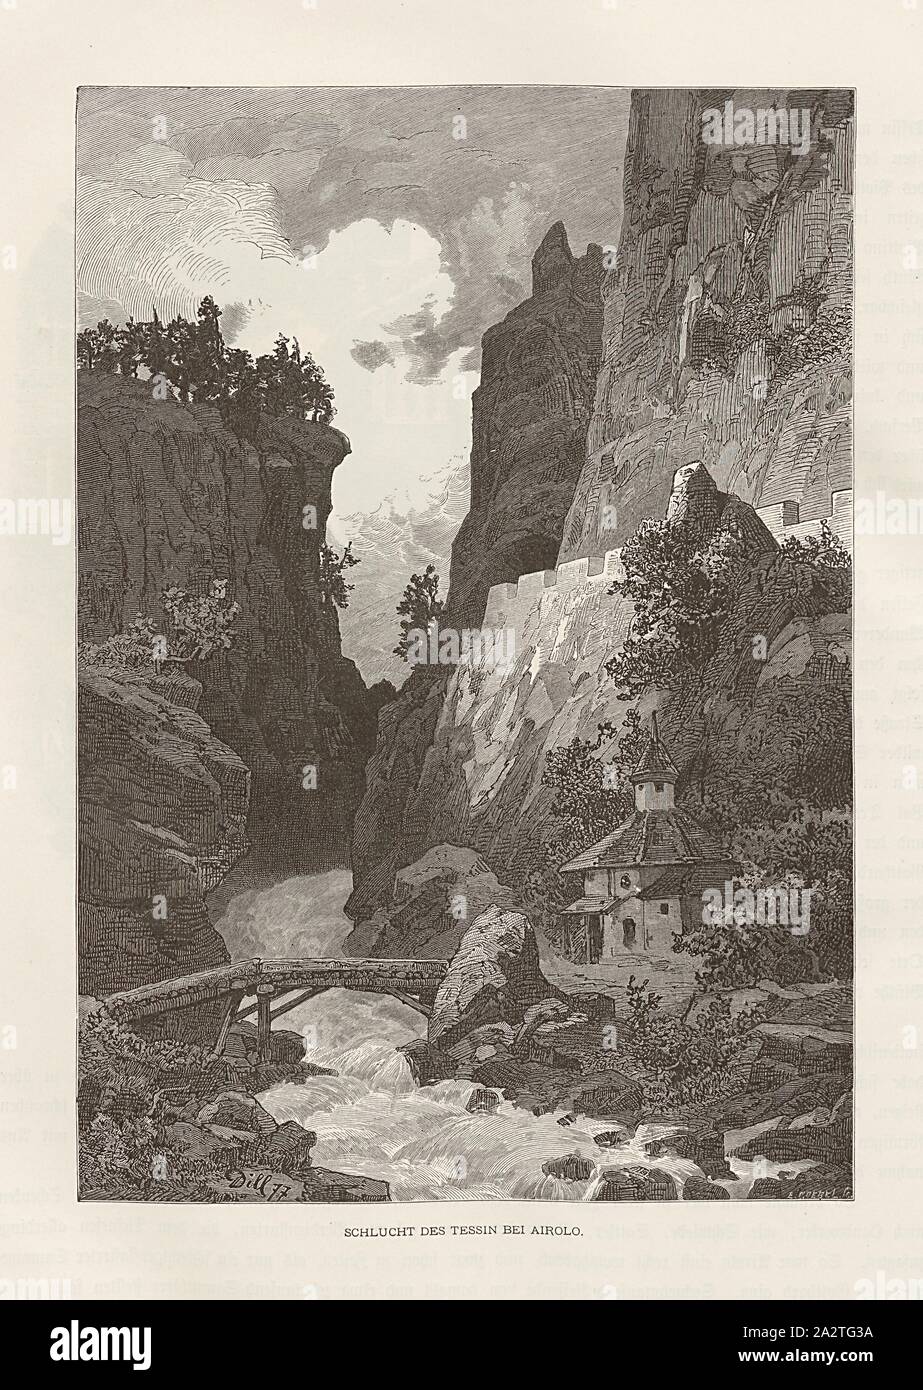 Gorge of Ticino at Airolo, Illustration of a chapel and a bridge over the Ticino in a gorge near Airolo from the 19th century, signed: Dill, E. Goebel, Fig. 317, p. 362, Dill, Ludwig; Goebel, E. (sc.), Woldemar Kaden: Das Schweizerland: eine Sommerfahrt durch Gebirg und Thal. Stuttgart: Engelhorn, 1875 Stock Photo